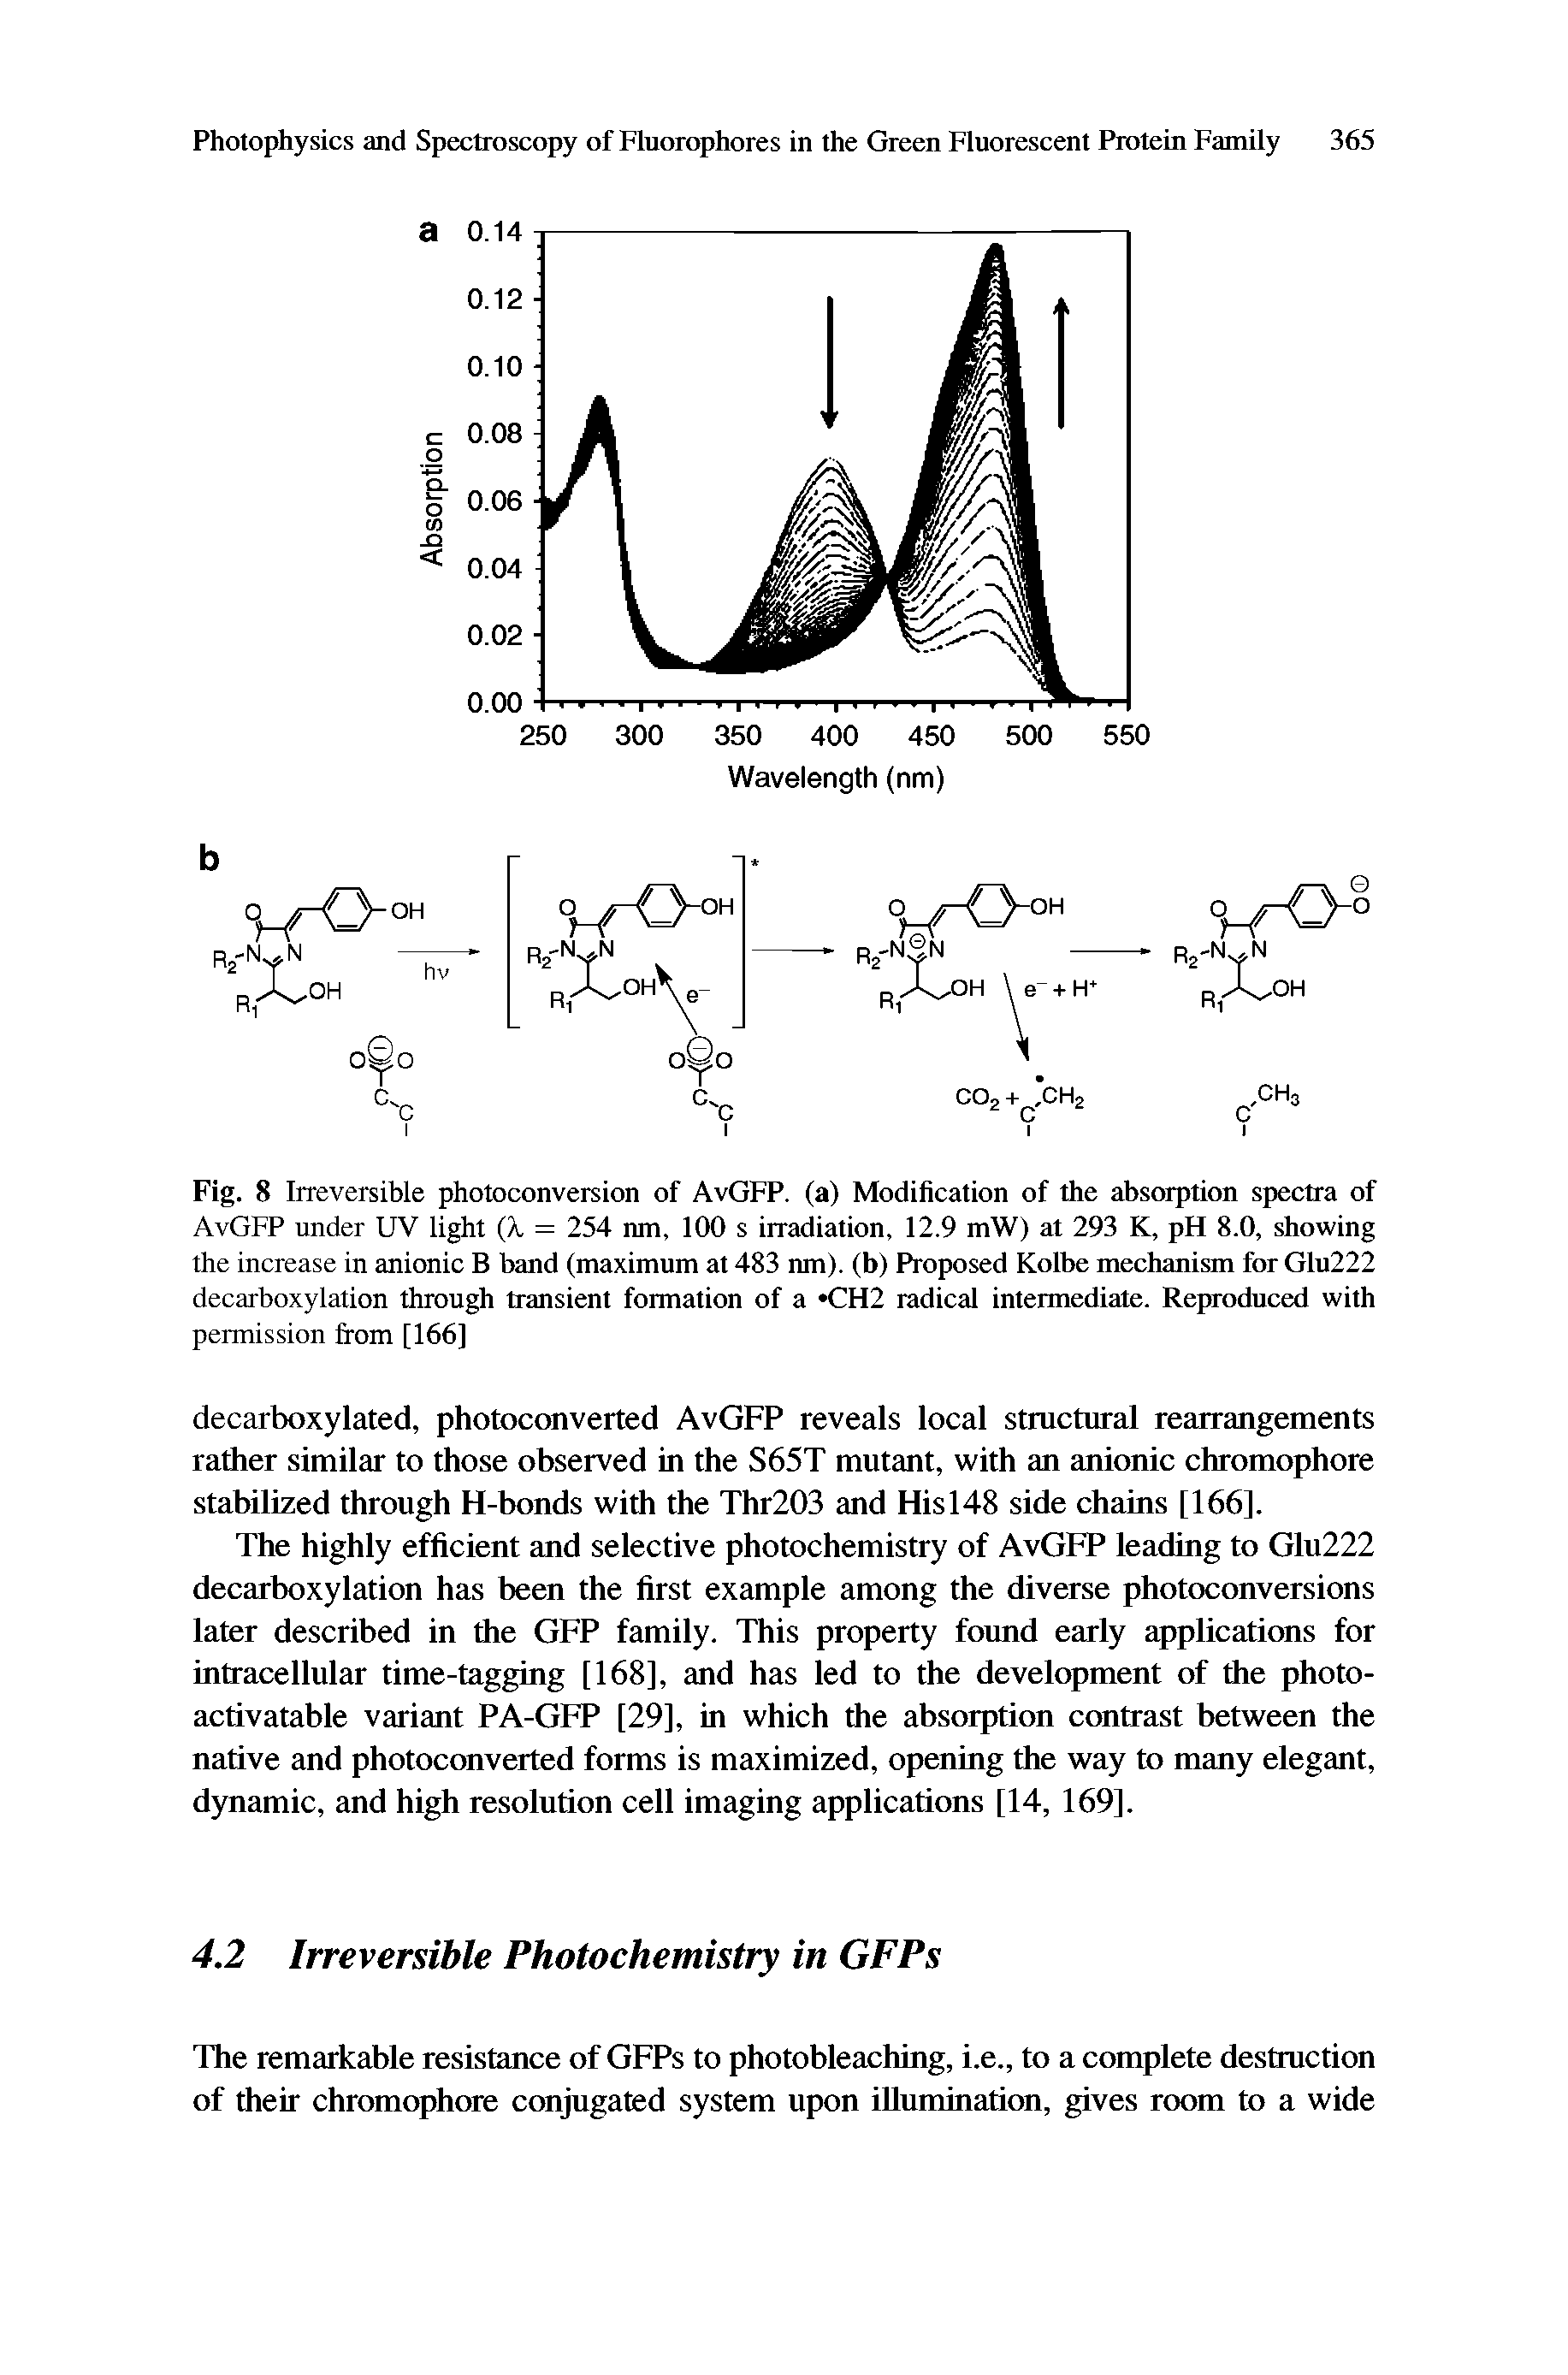 Fig. 8 Irreversible photoconversion of AvGFP. (a) Modification of the absorption spectra of AvGFP under UV light (A = 254 nm, 100 s irradiation, 12.9 mW) at 293 K, pH 8.0, showing the increase in anionic B band (maximum at 483 nm). (b) Proposed Kolbe mechanism for Glu222 decarboxylation through transient formation of a CH2 radical intermediate. Reproduced with permission from [166]...